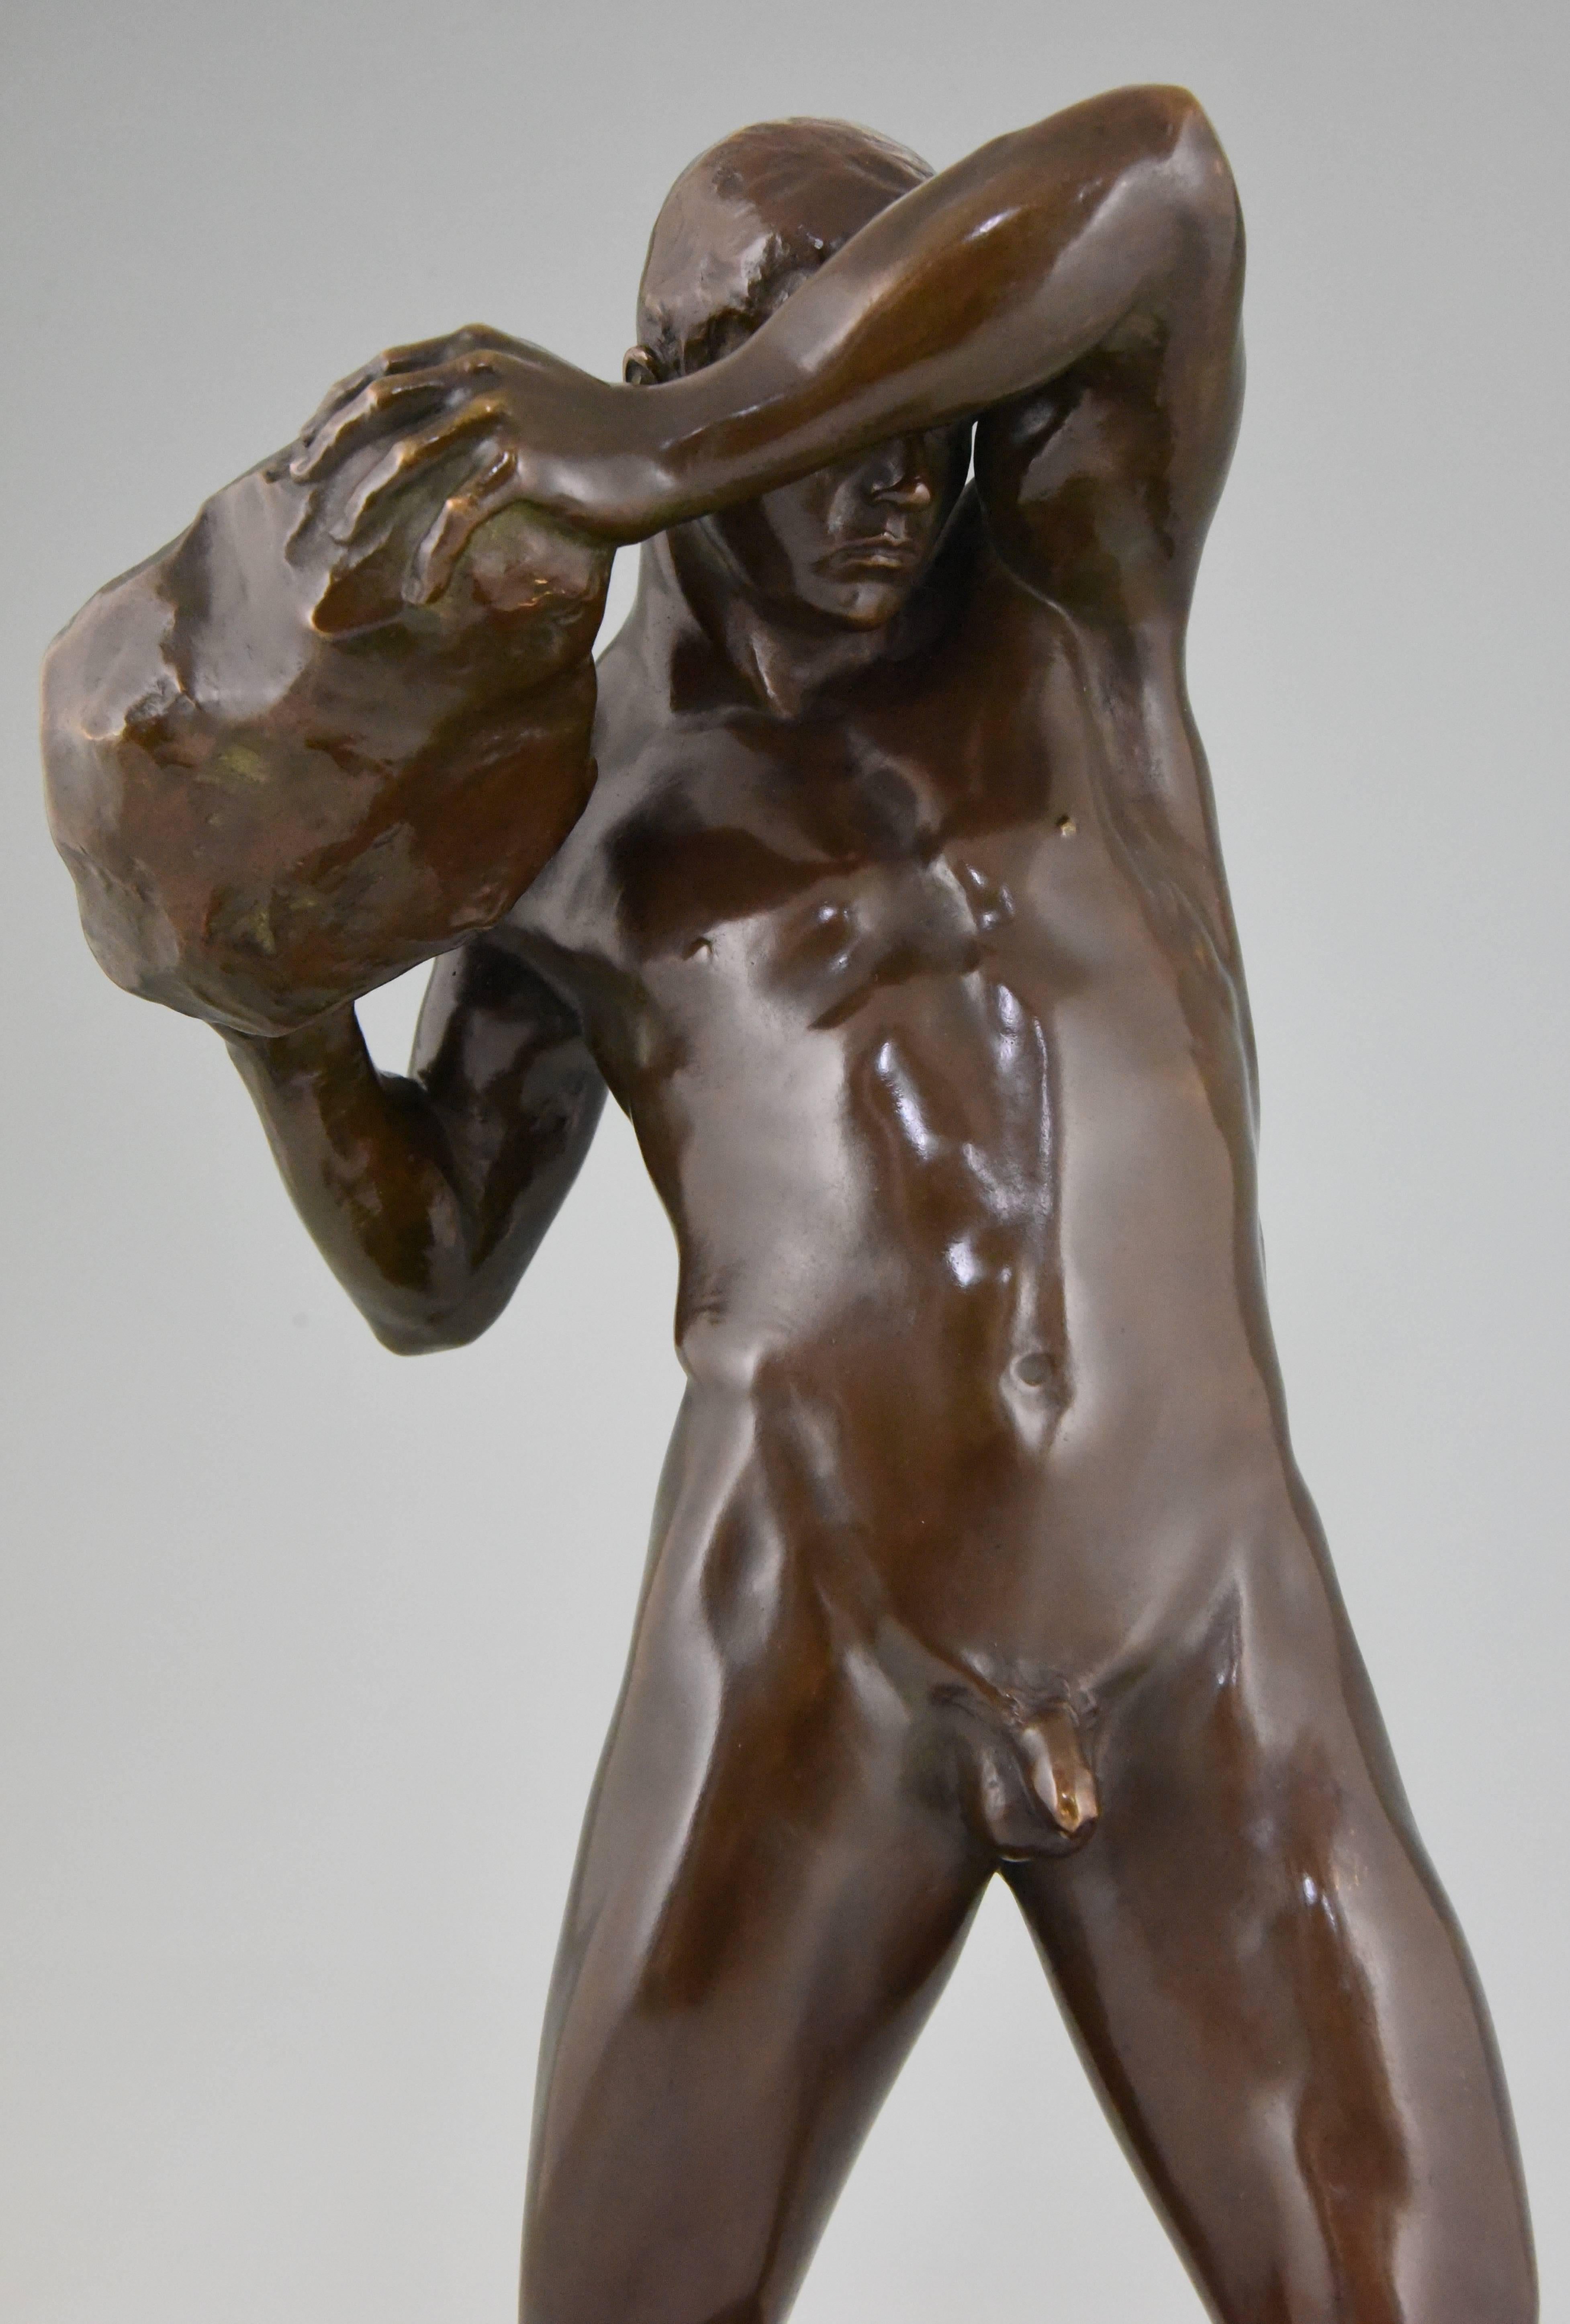 20th Century Antique Bronze Sculpture Male Nude Athlete by Paul Moye, 1923